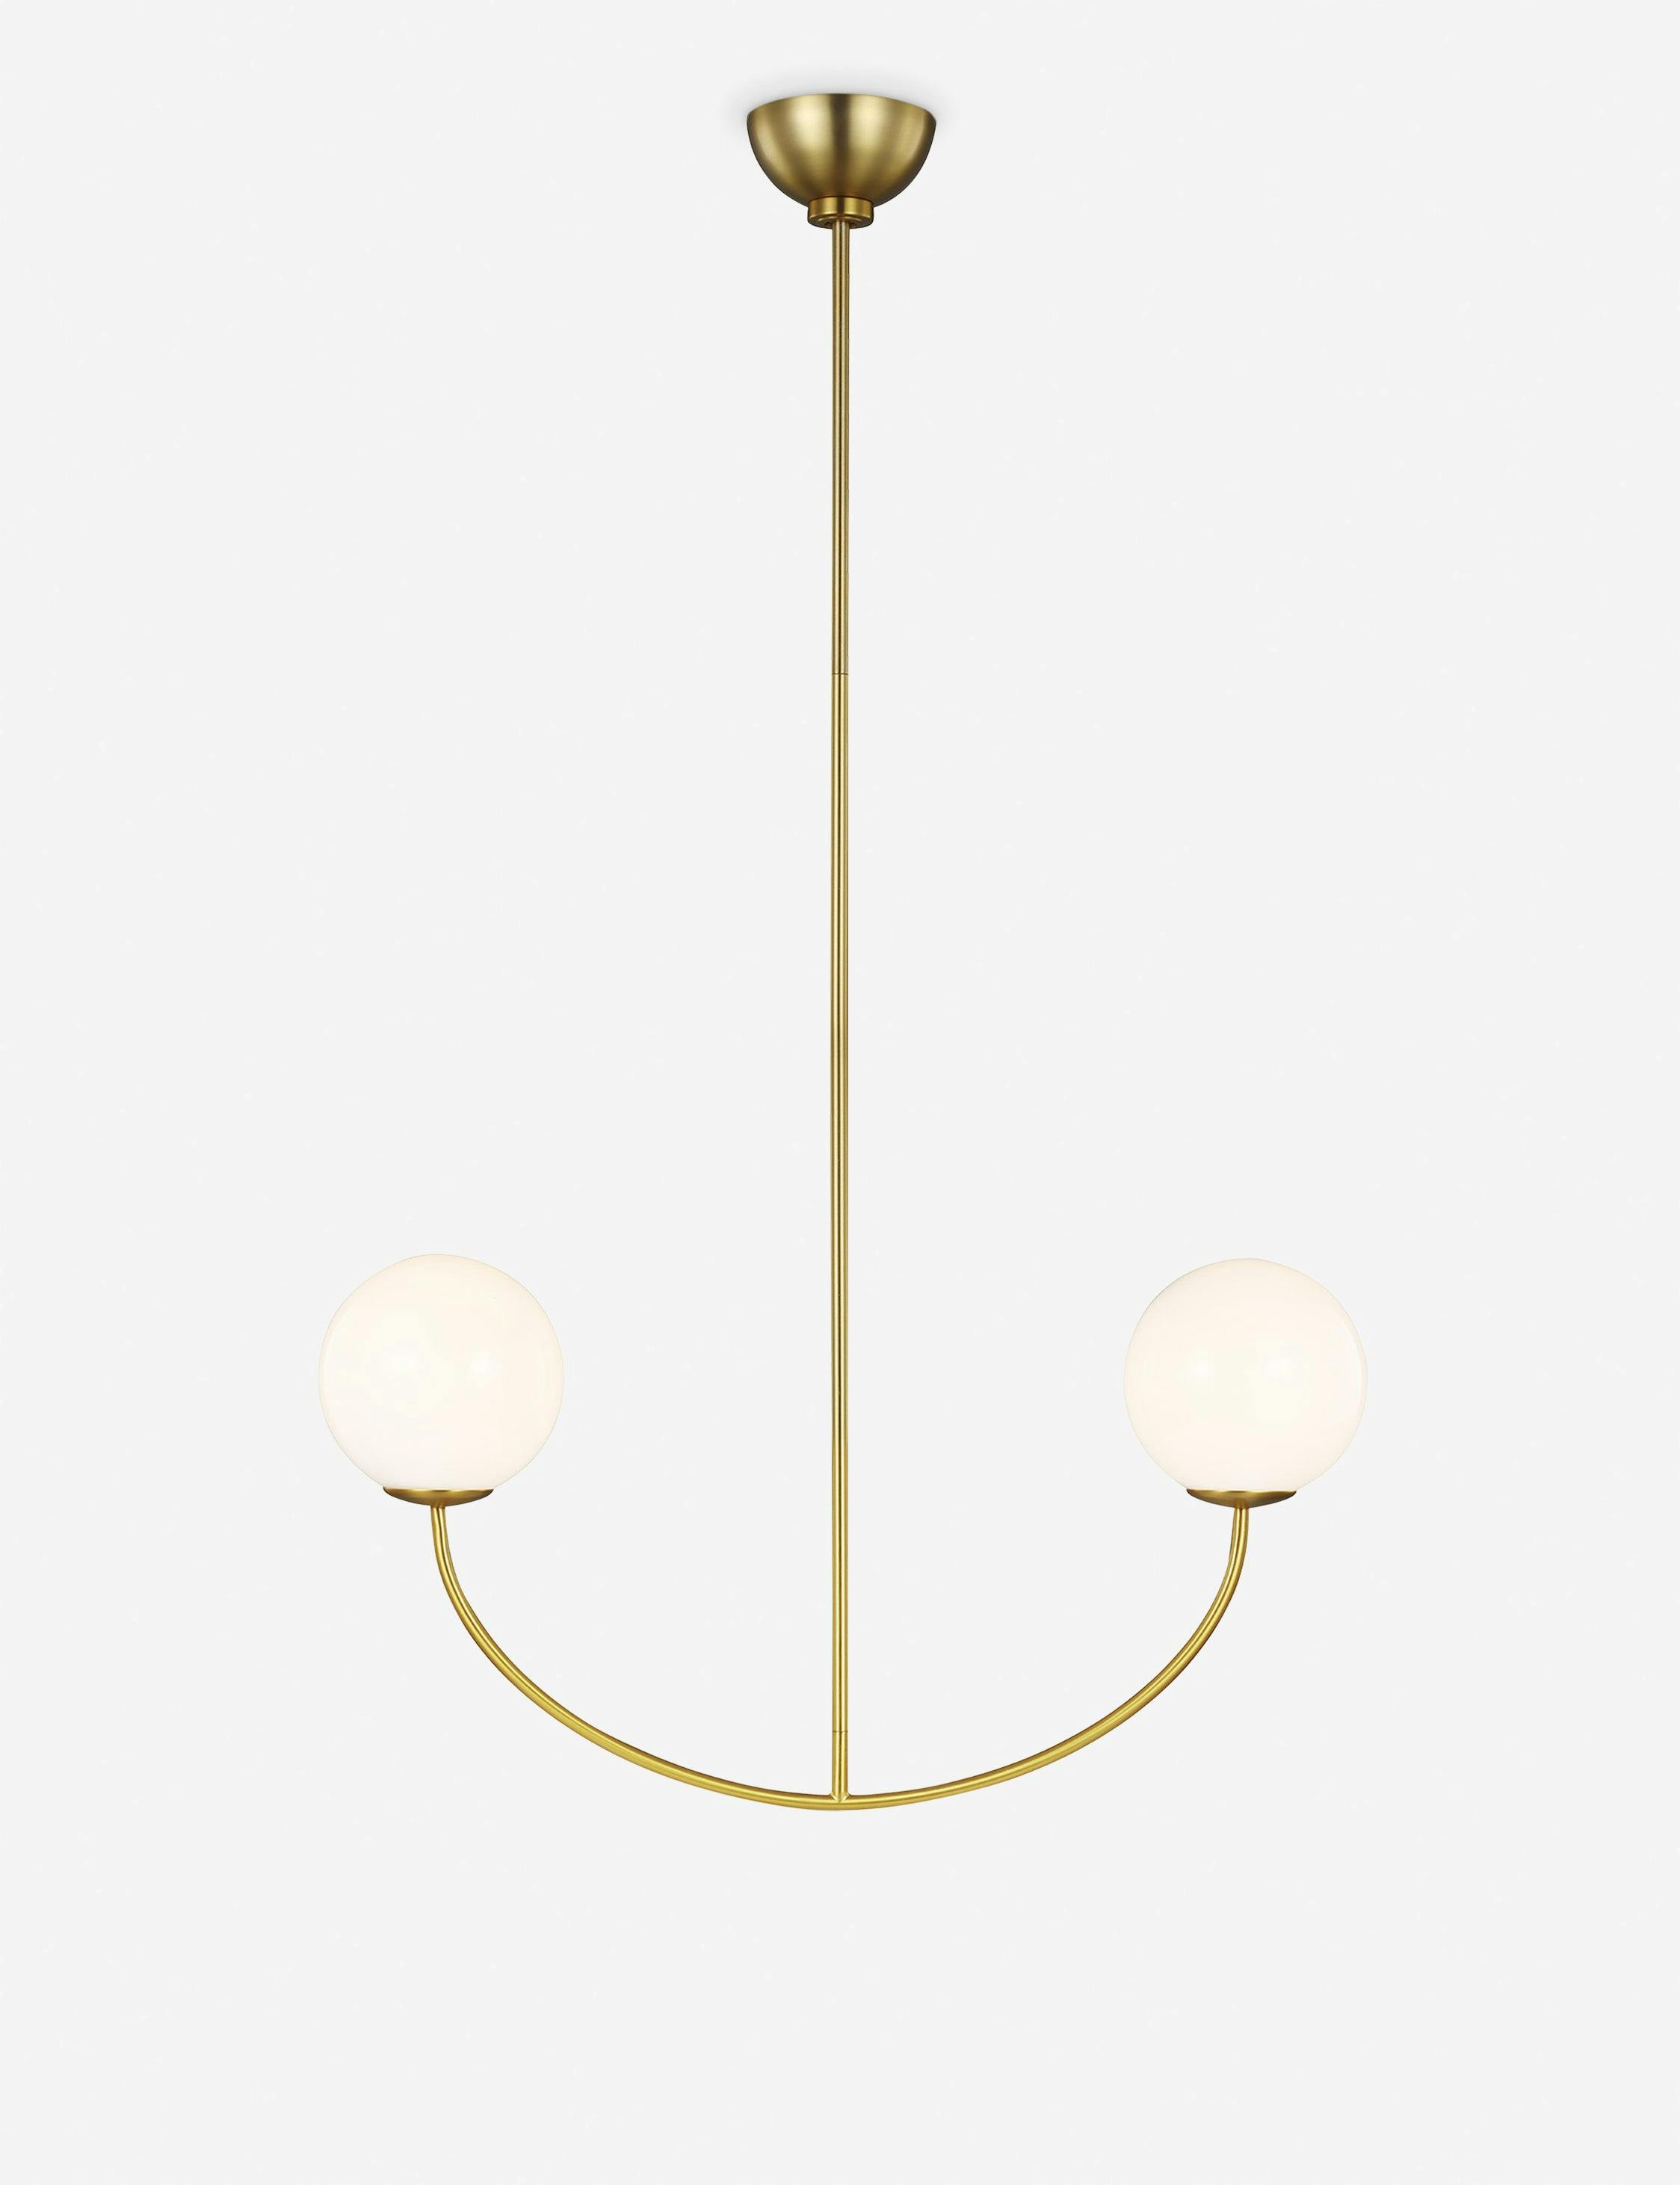 Galassia Burnished Brass 30" Linear Chandelier with Milk White Shade